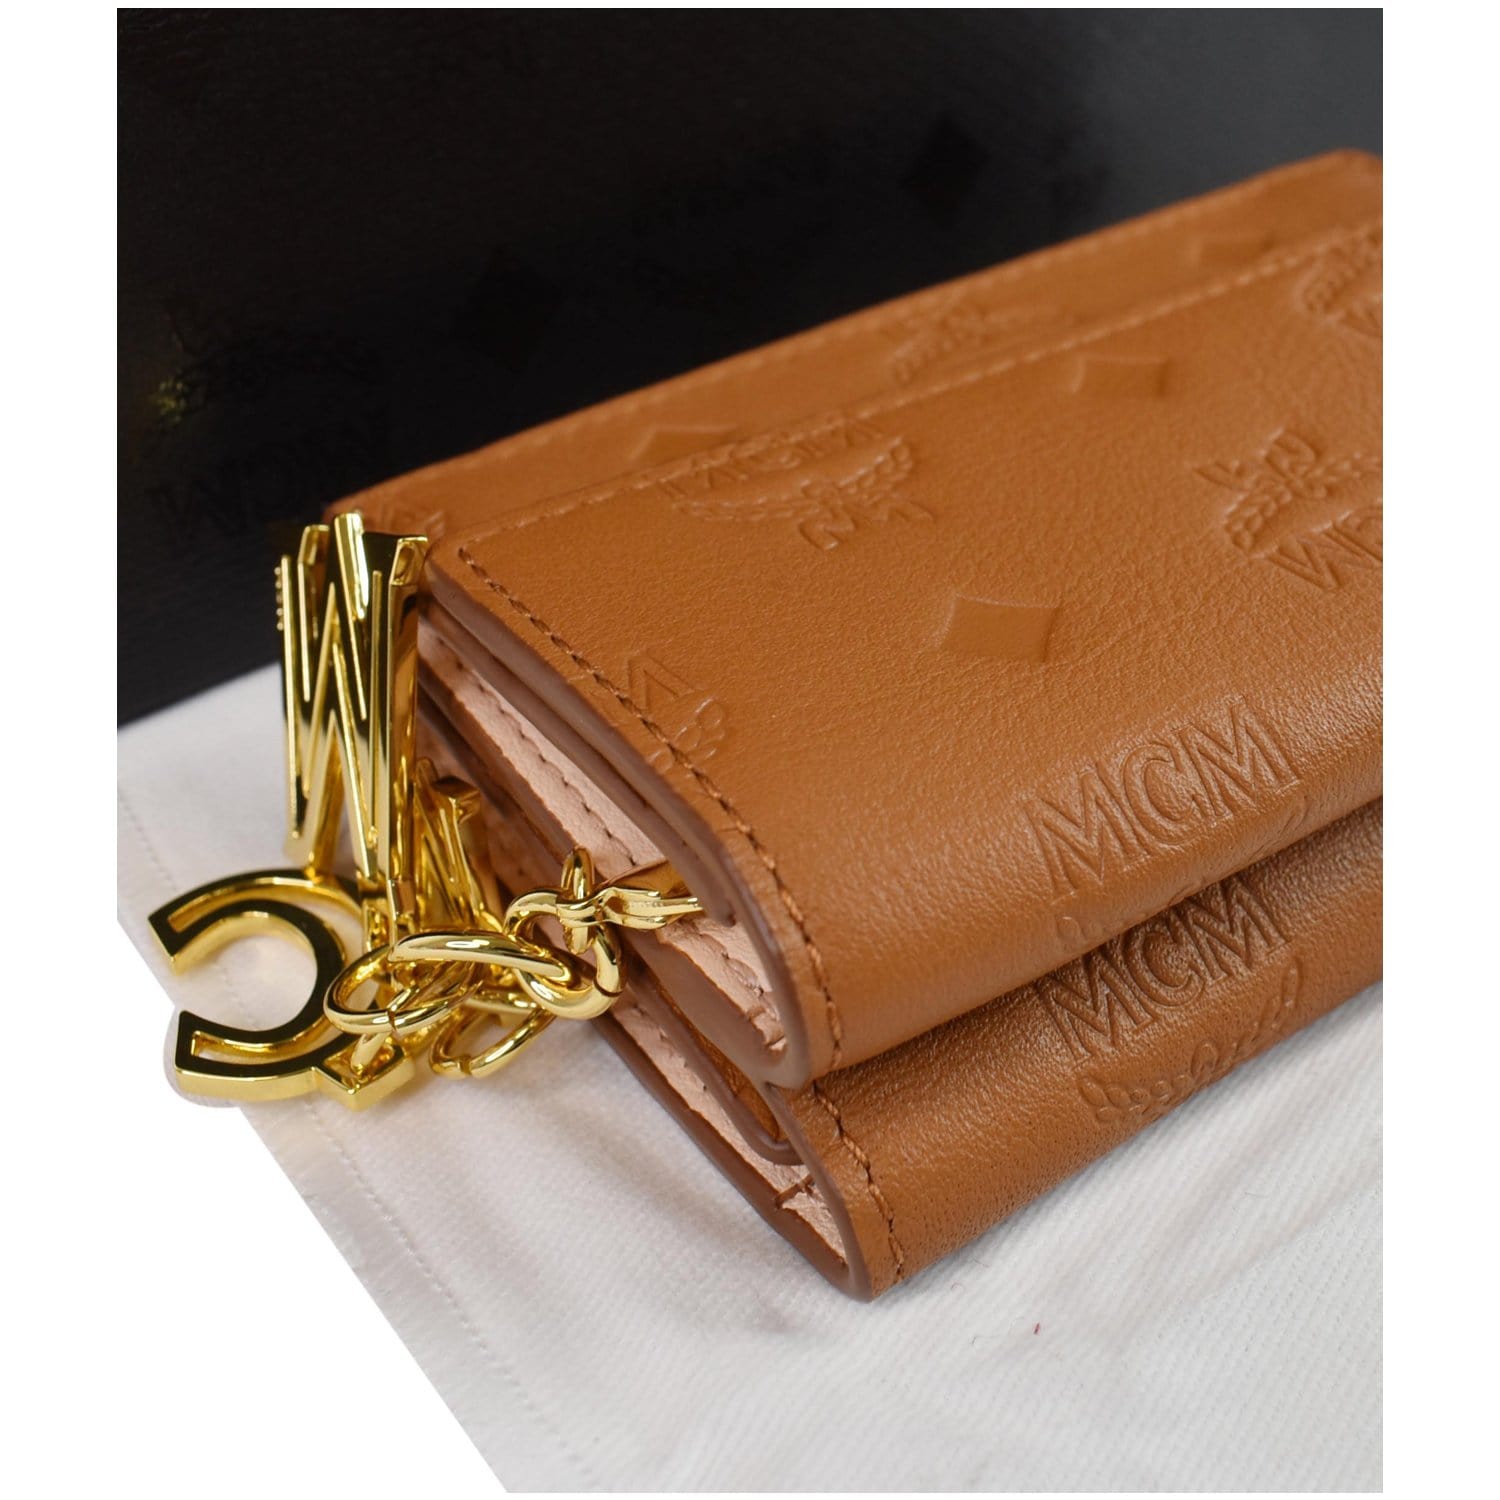 Mcm Trifold Wallet